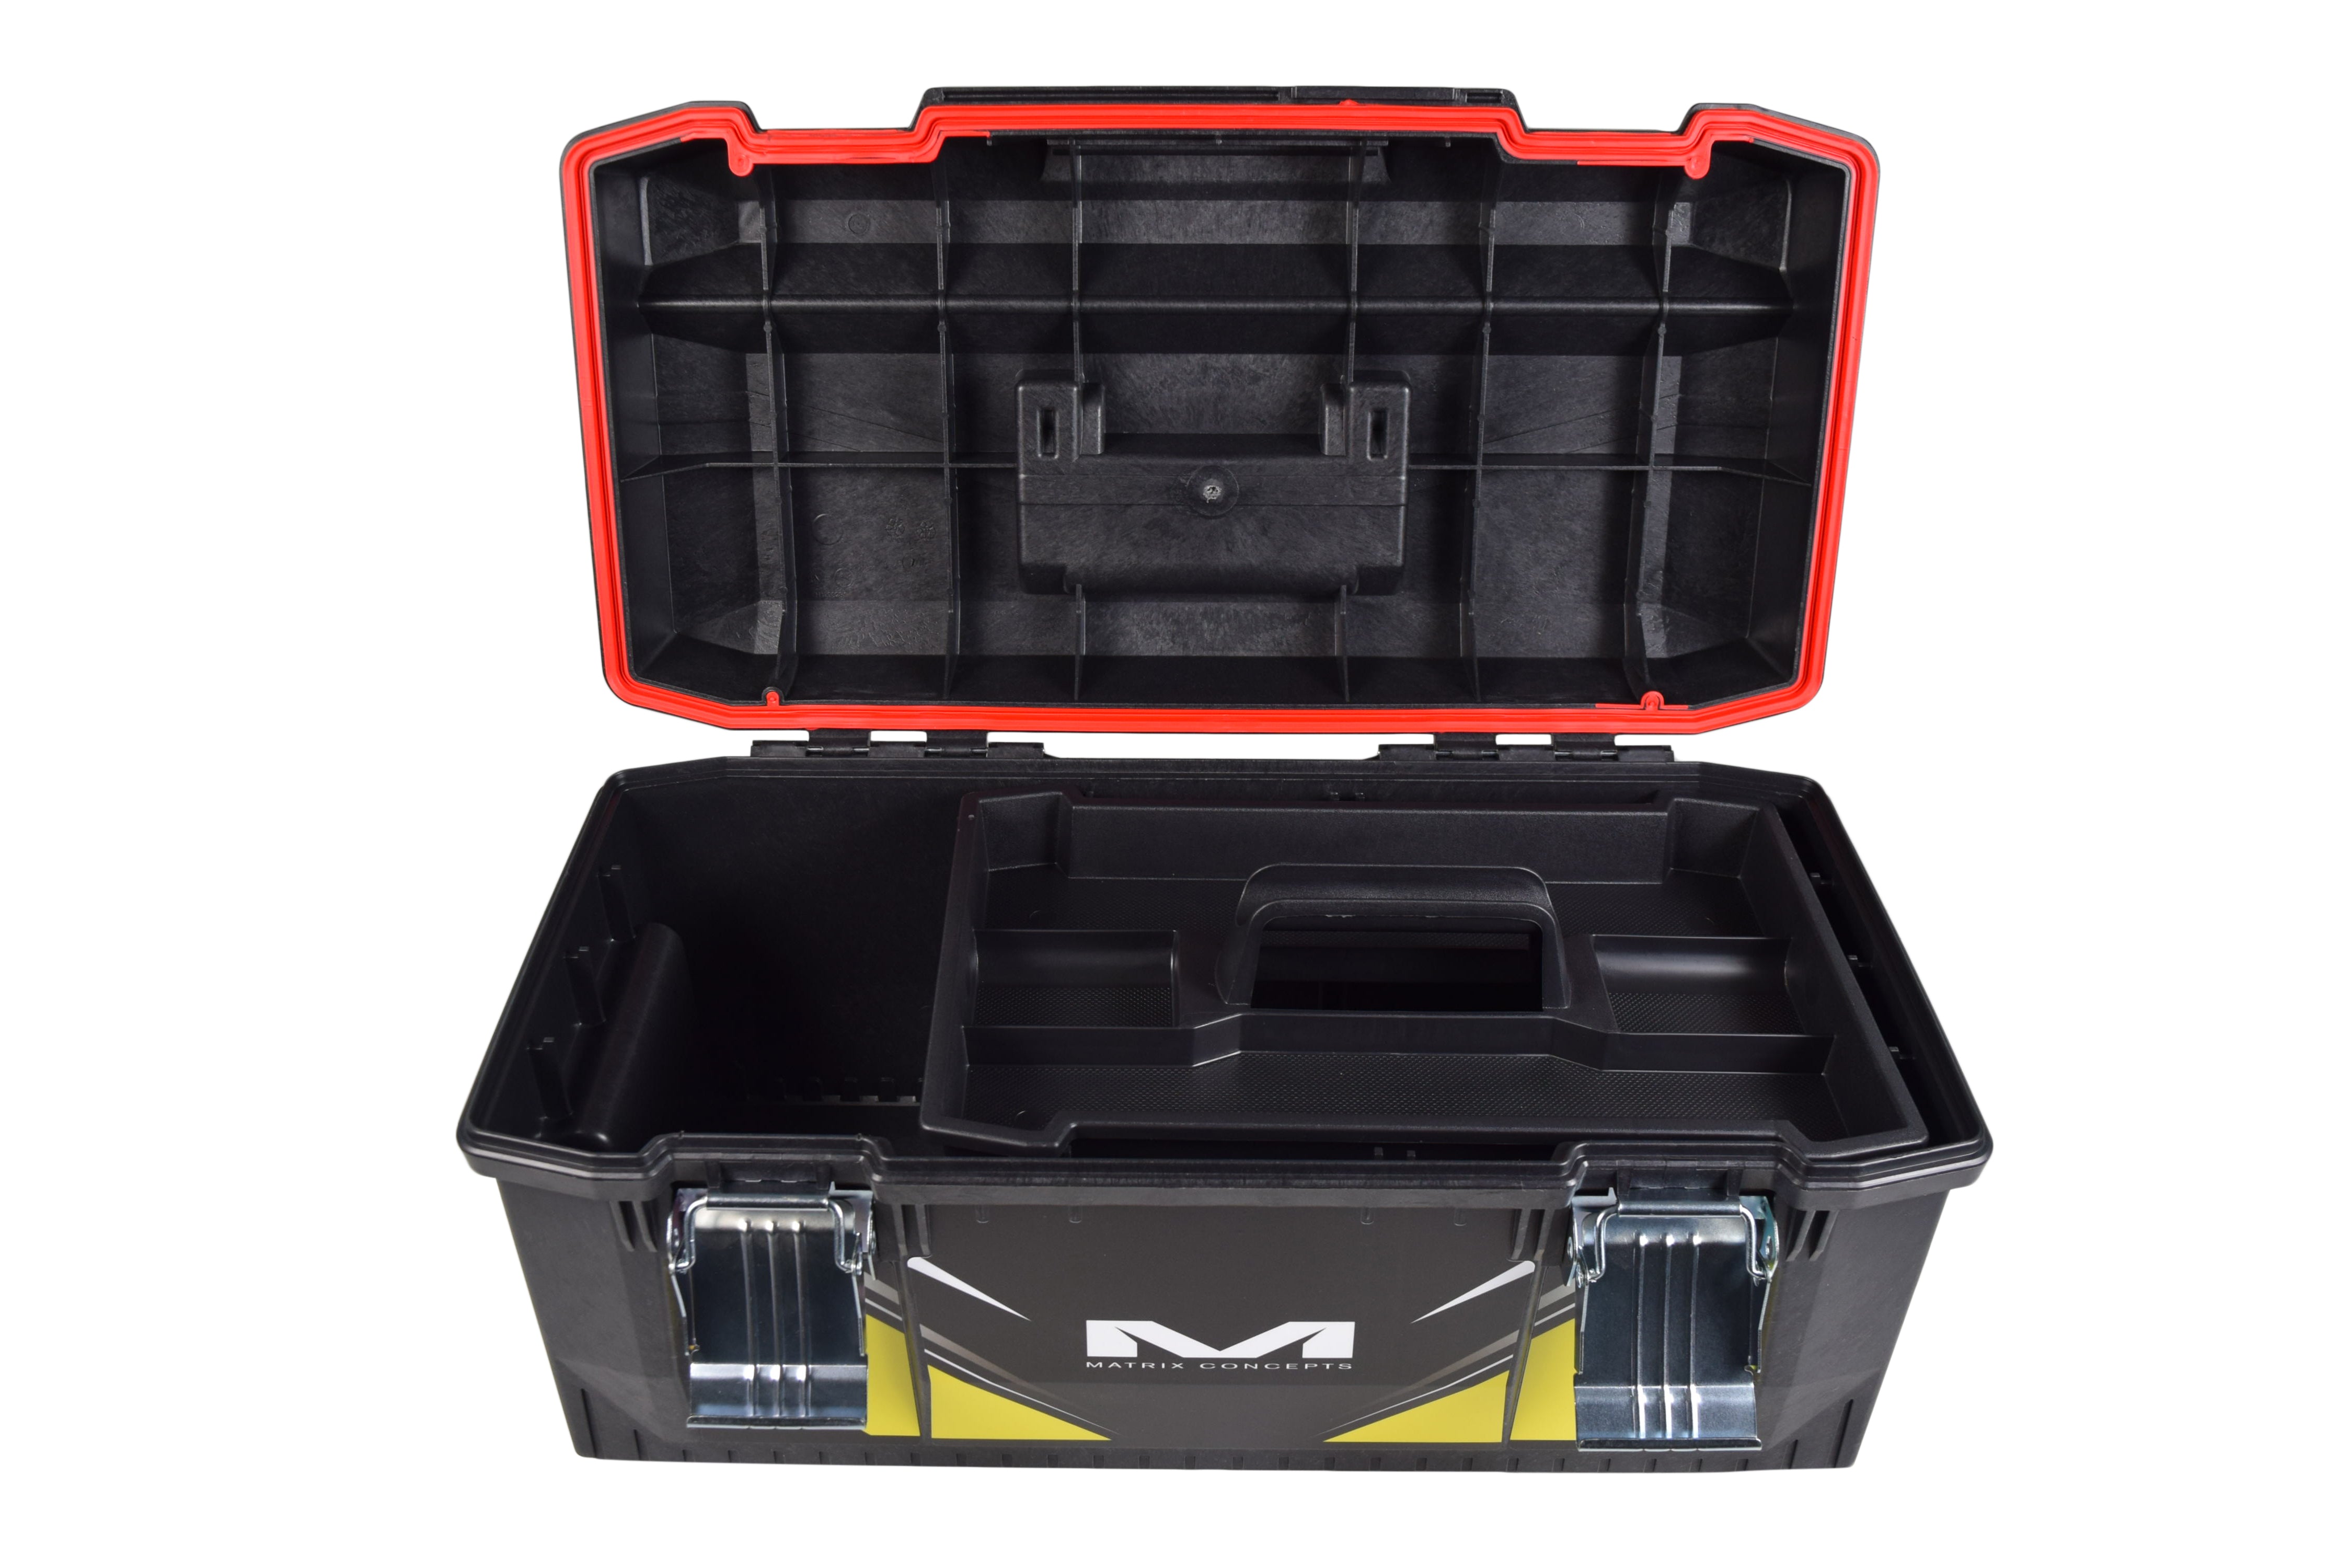 Matrix Concepts M01 Track Toolbox Black/Yellow with Small Sticker Kit